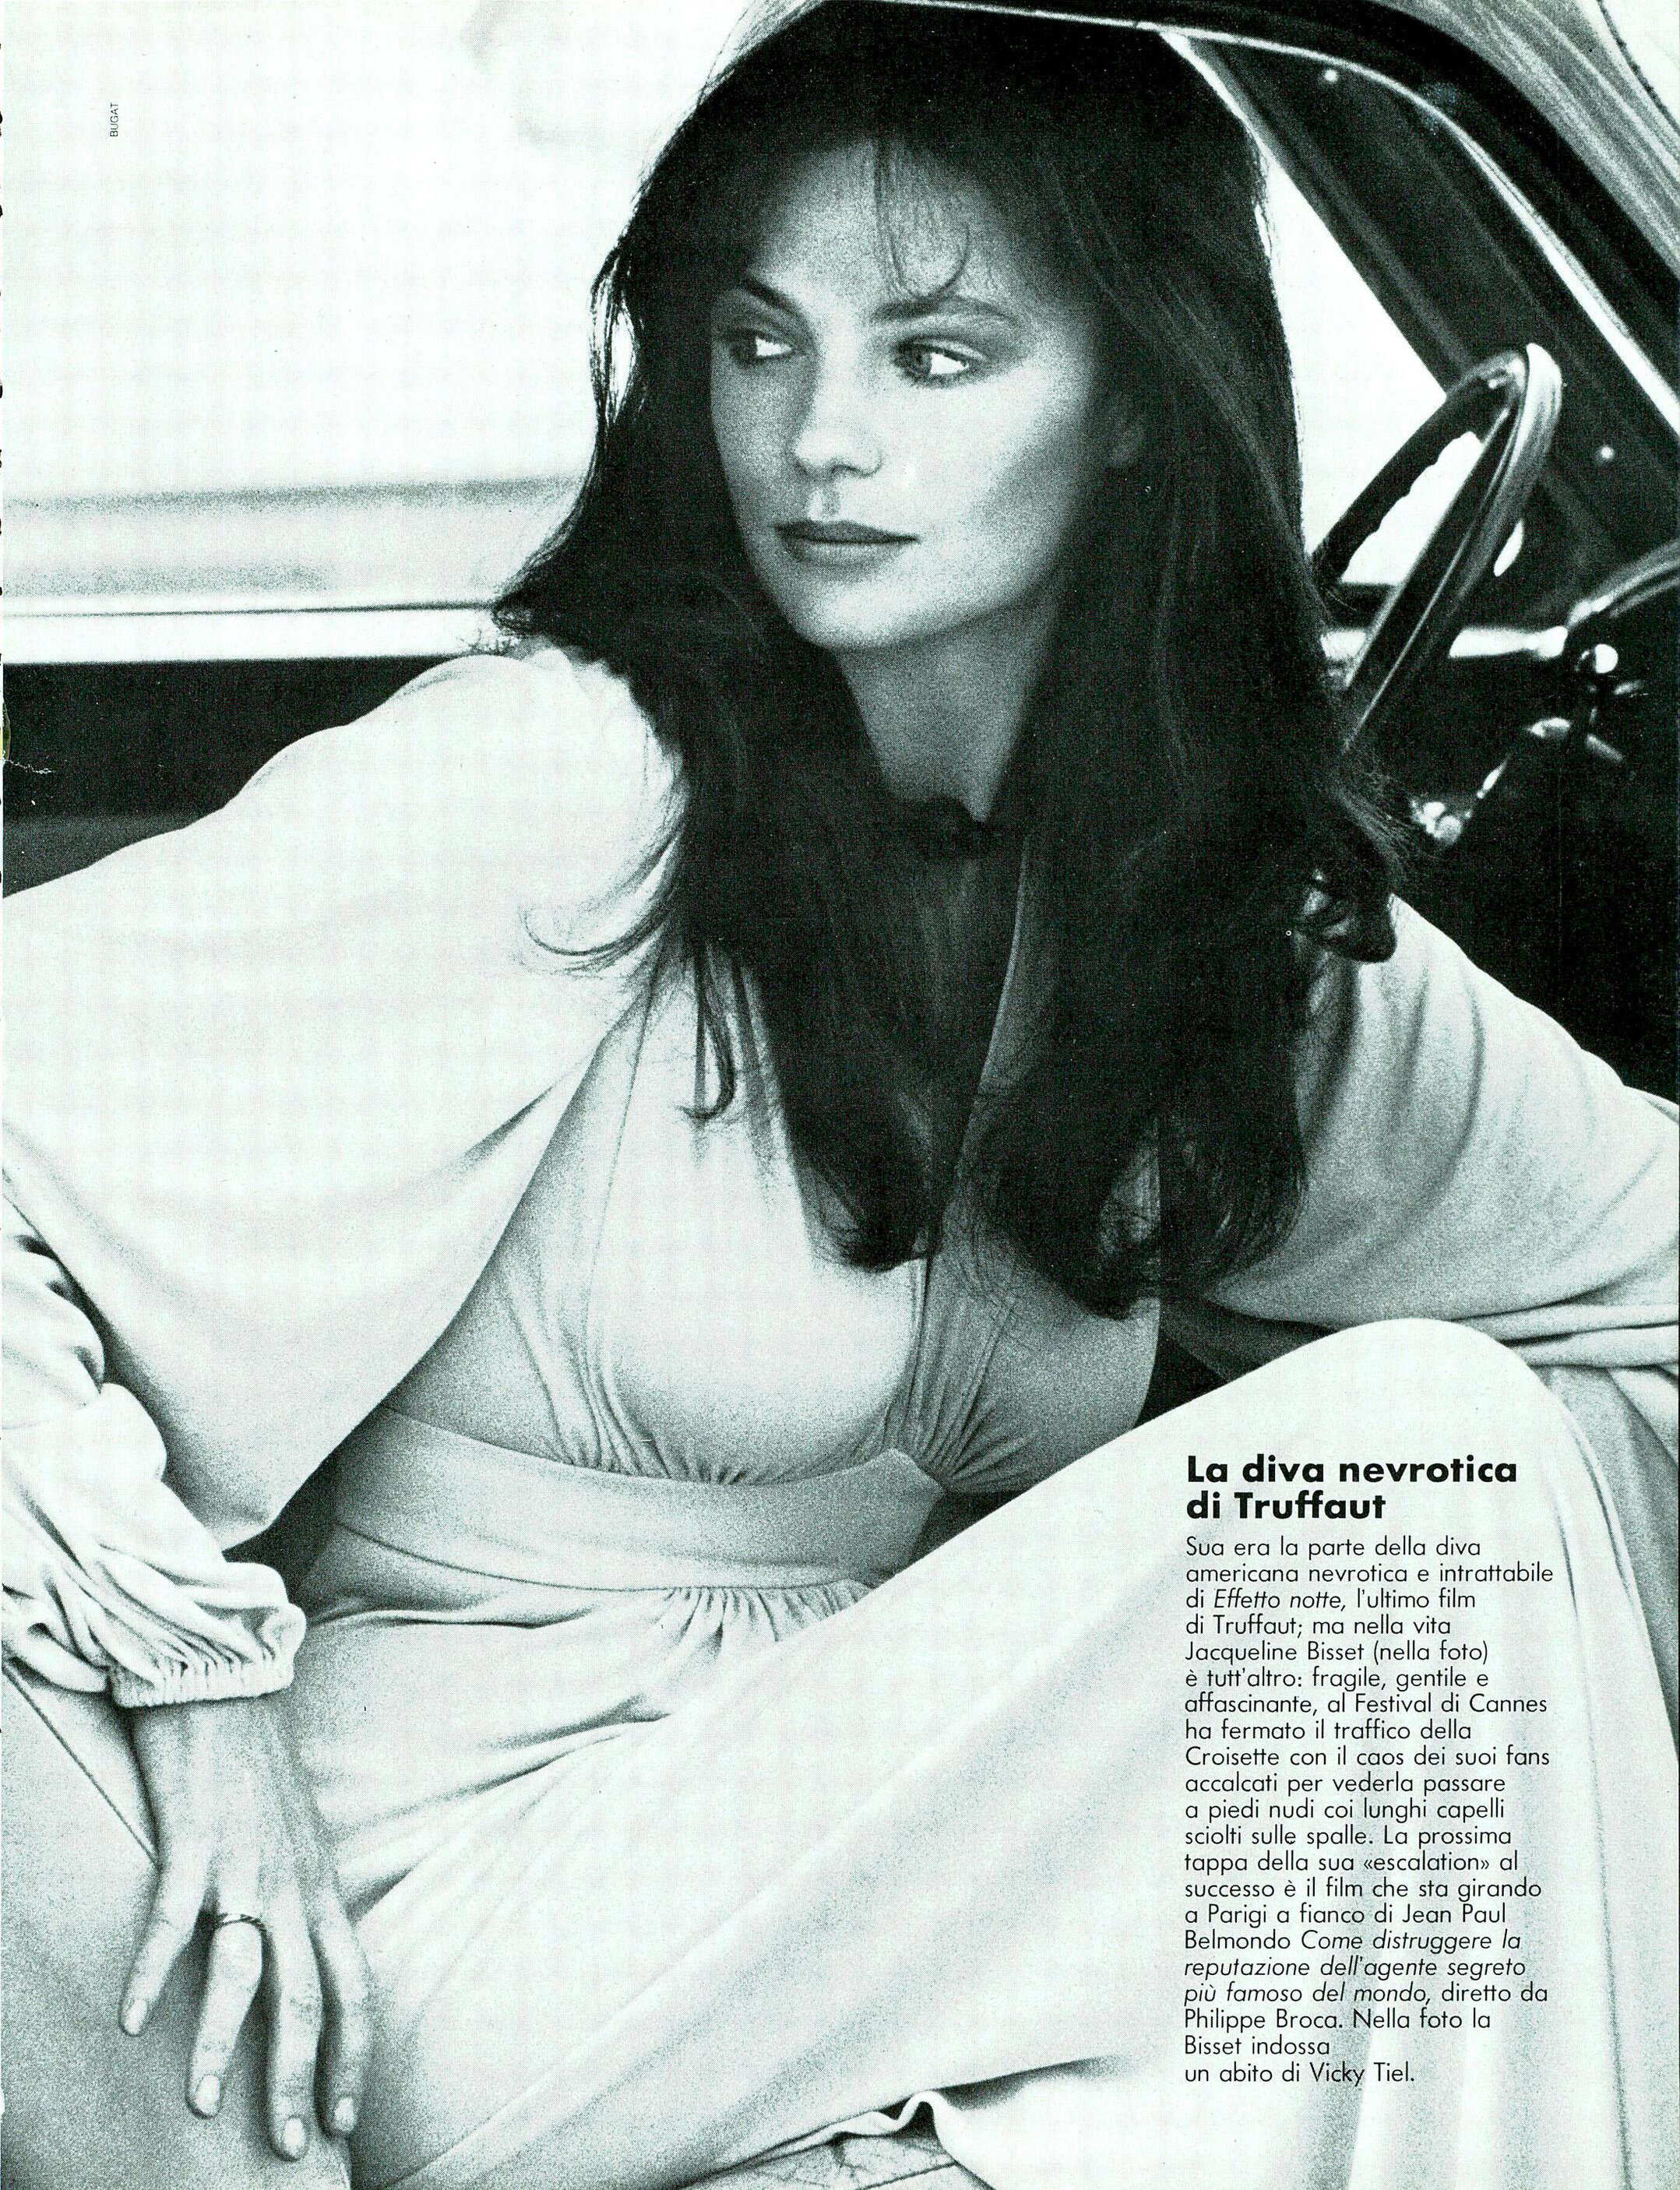 Jacqueline Bisset in a dress by Vicky Tiel. Photo by Bugat for Vogue Italia, January 1974.